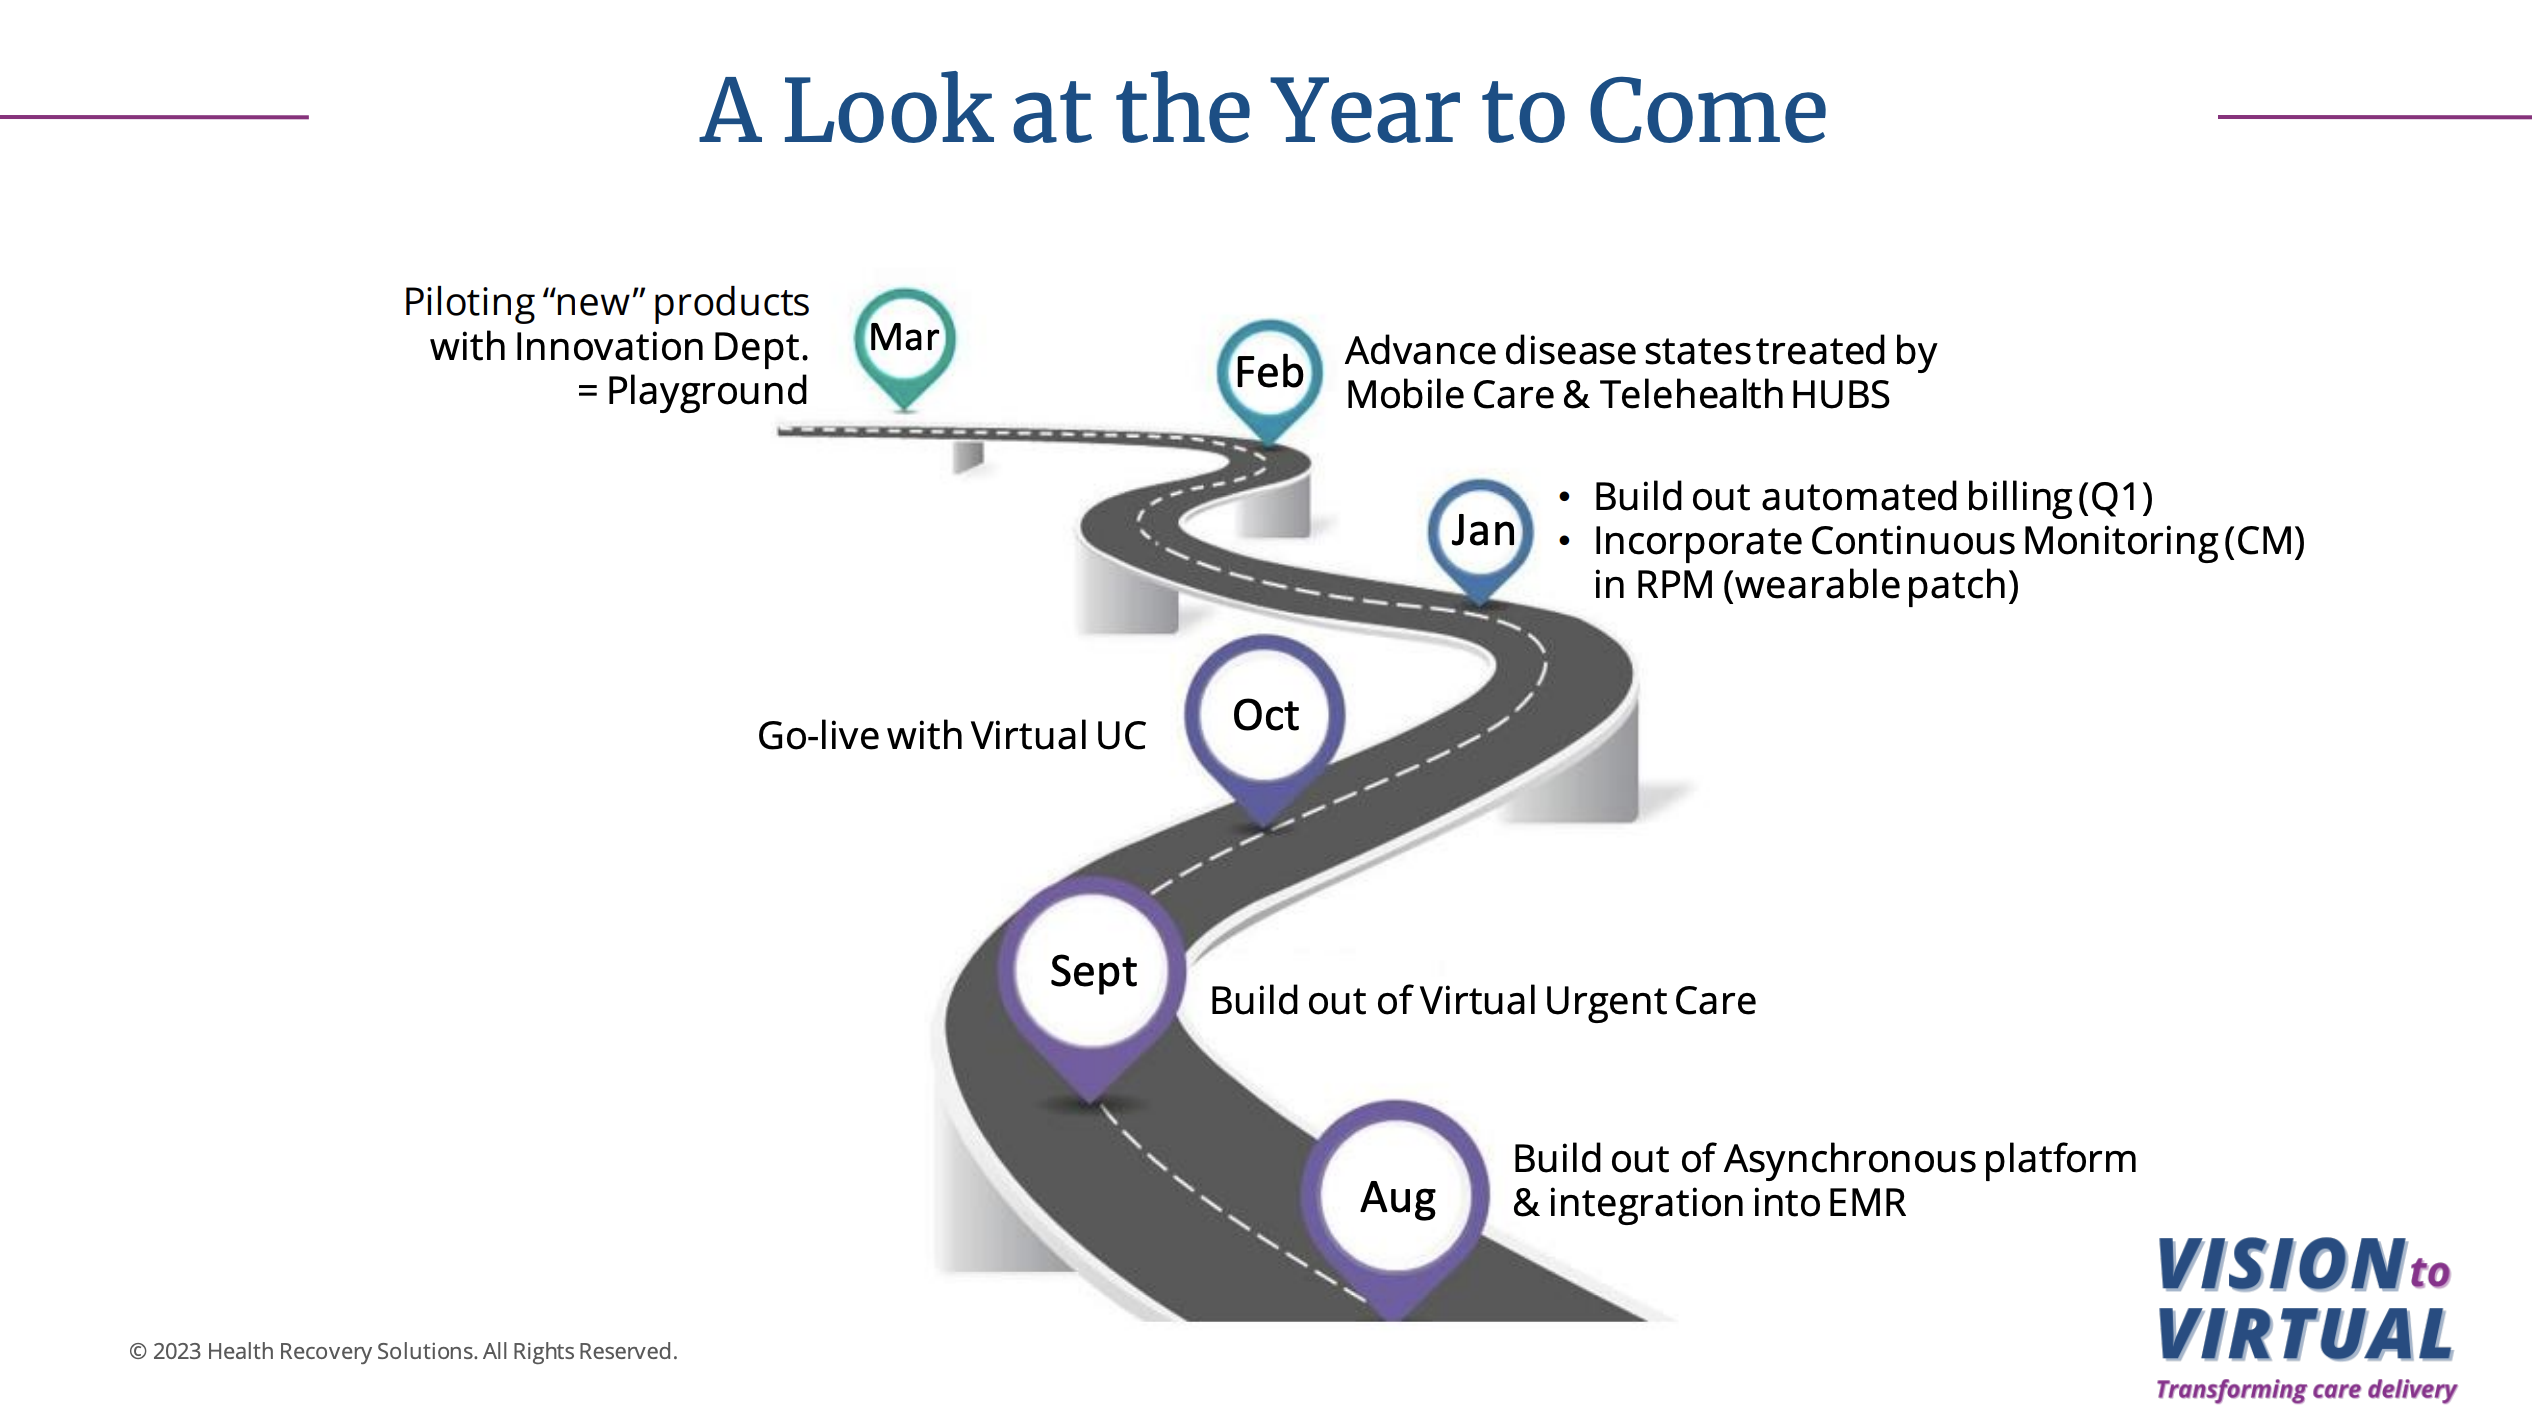 A slide from the webinar presentation shows a roadmap for the year ahead for Lee Health's virtual care program